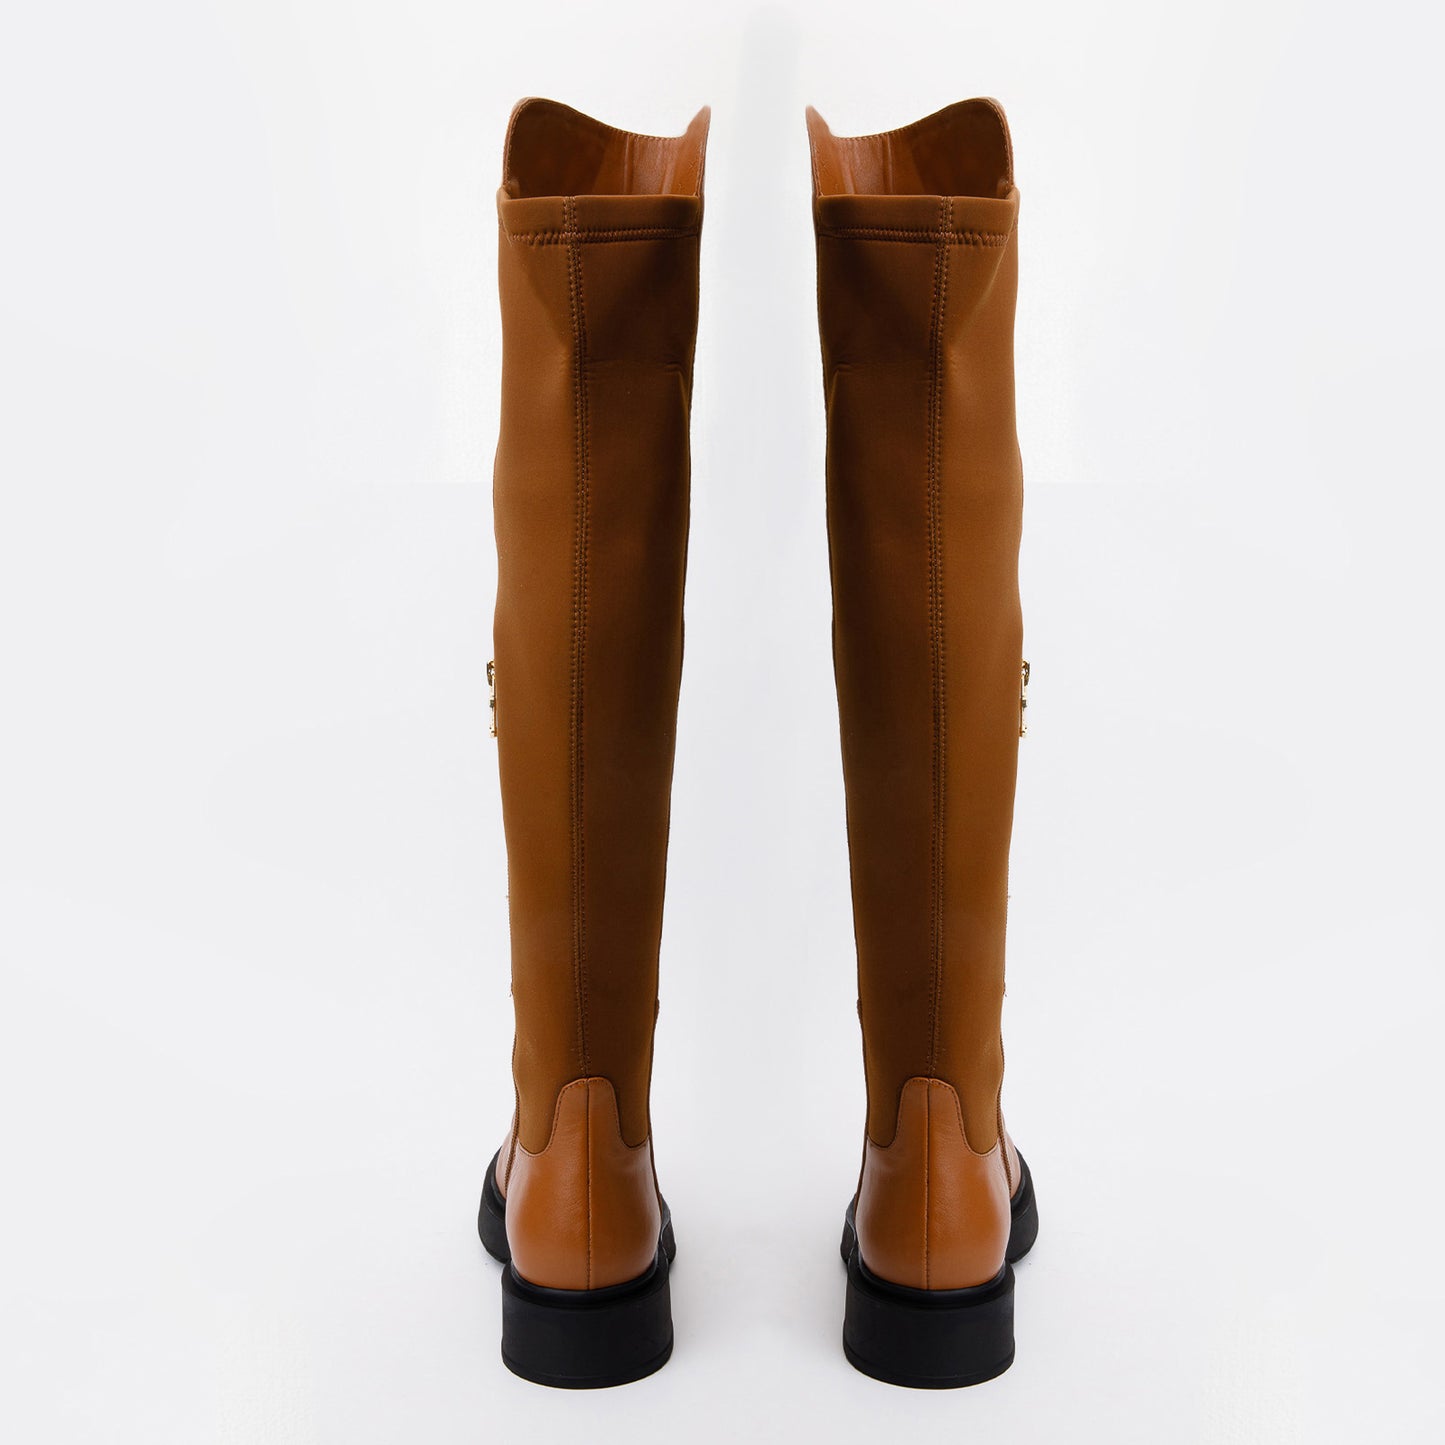 The  Harmony Belle Tan Leather Knee High Women Boot